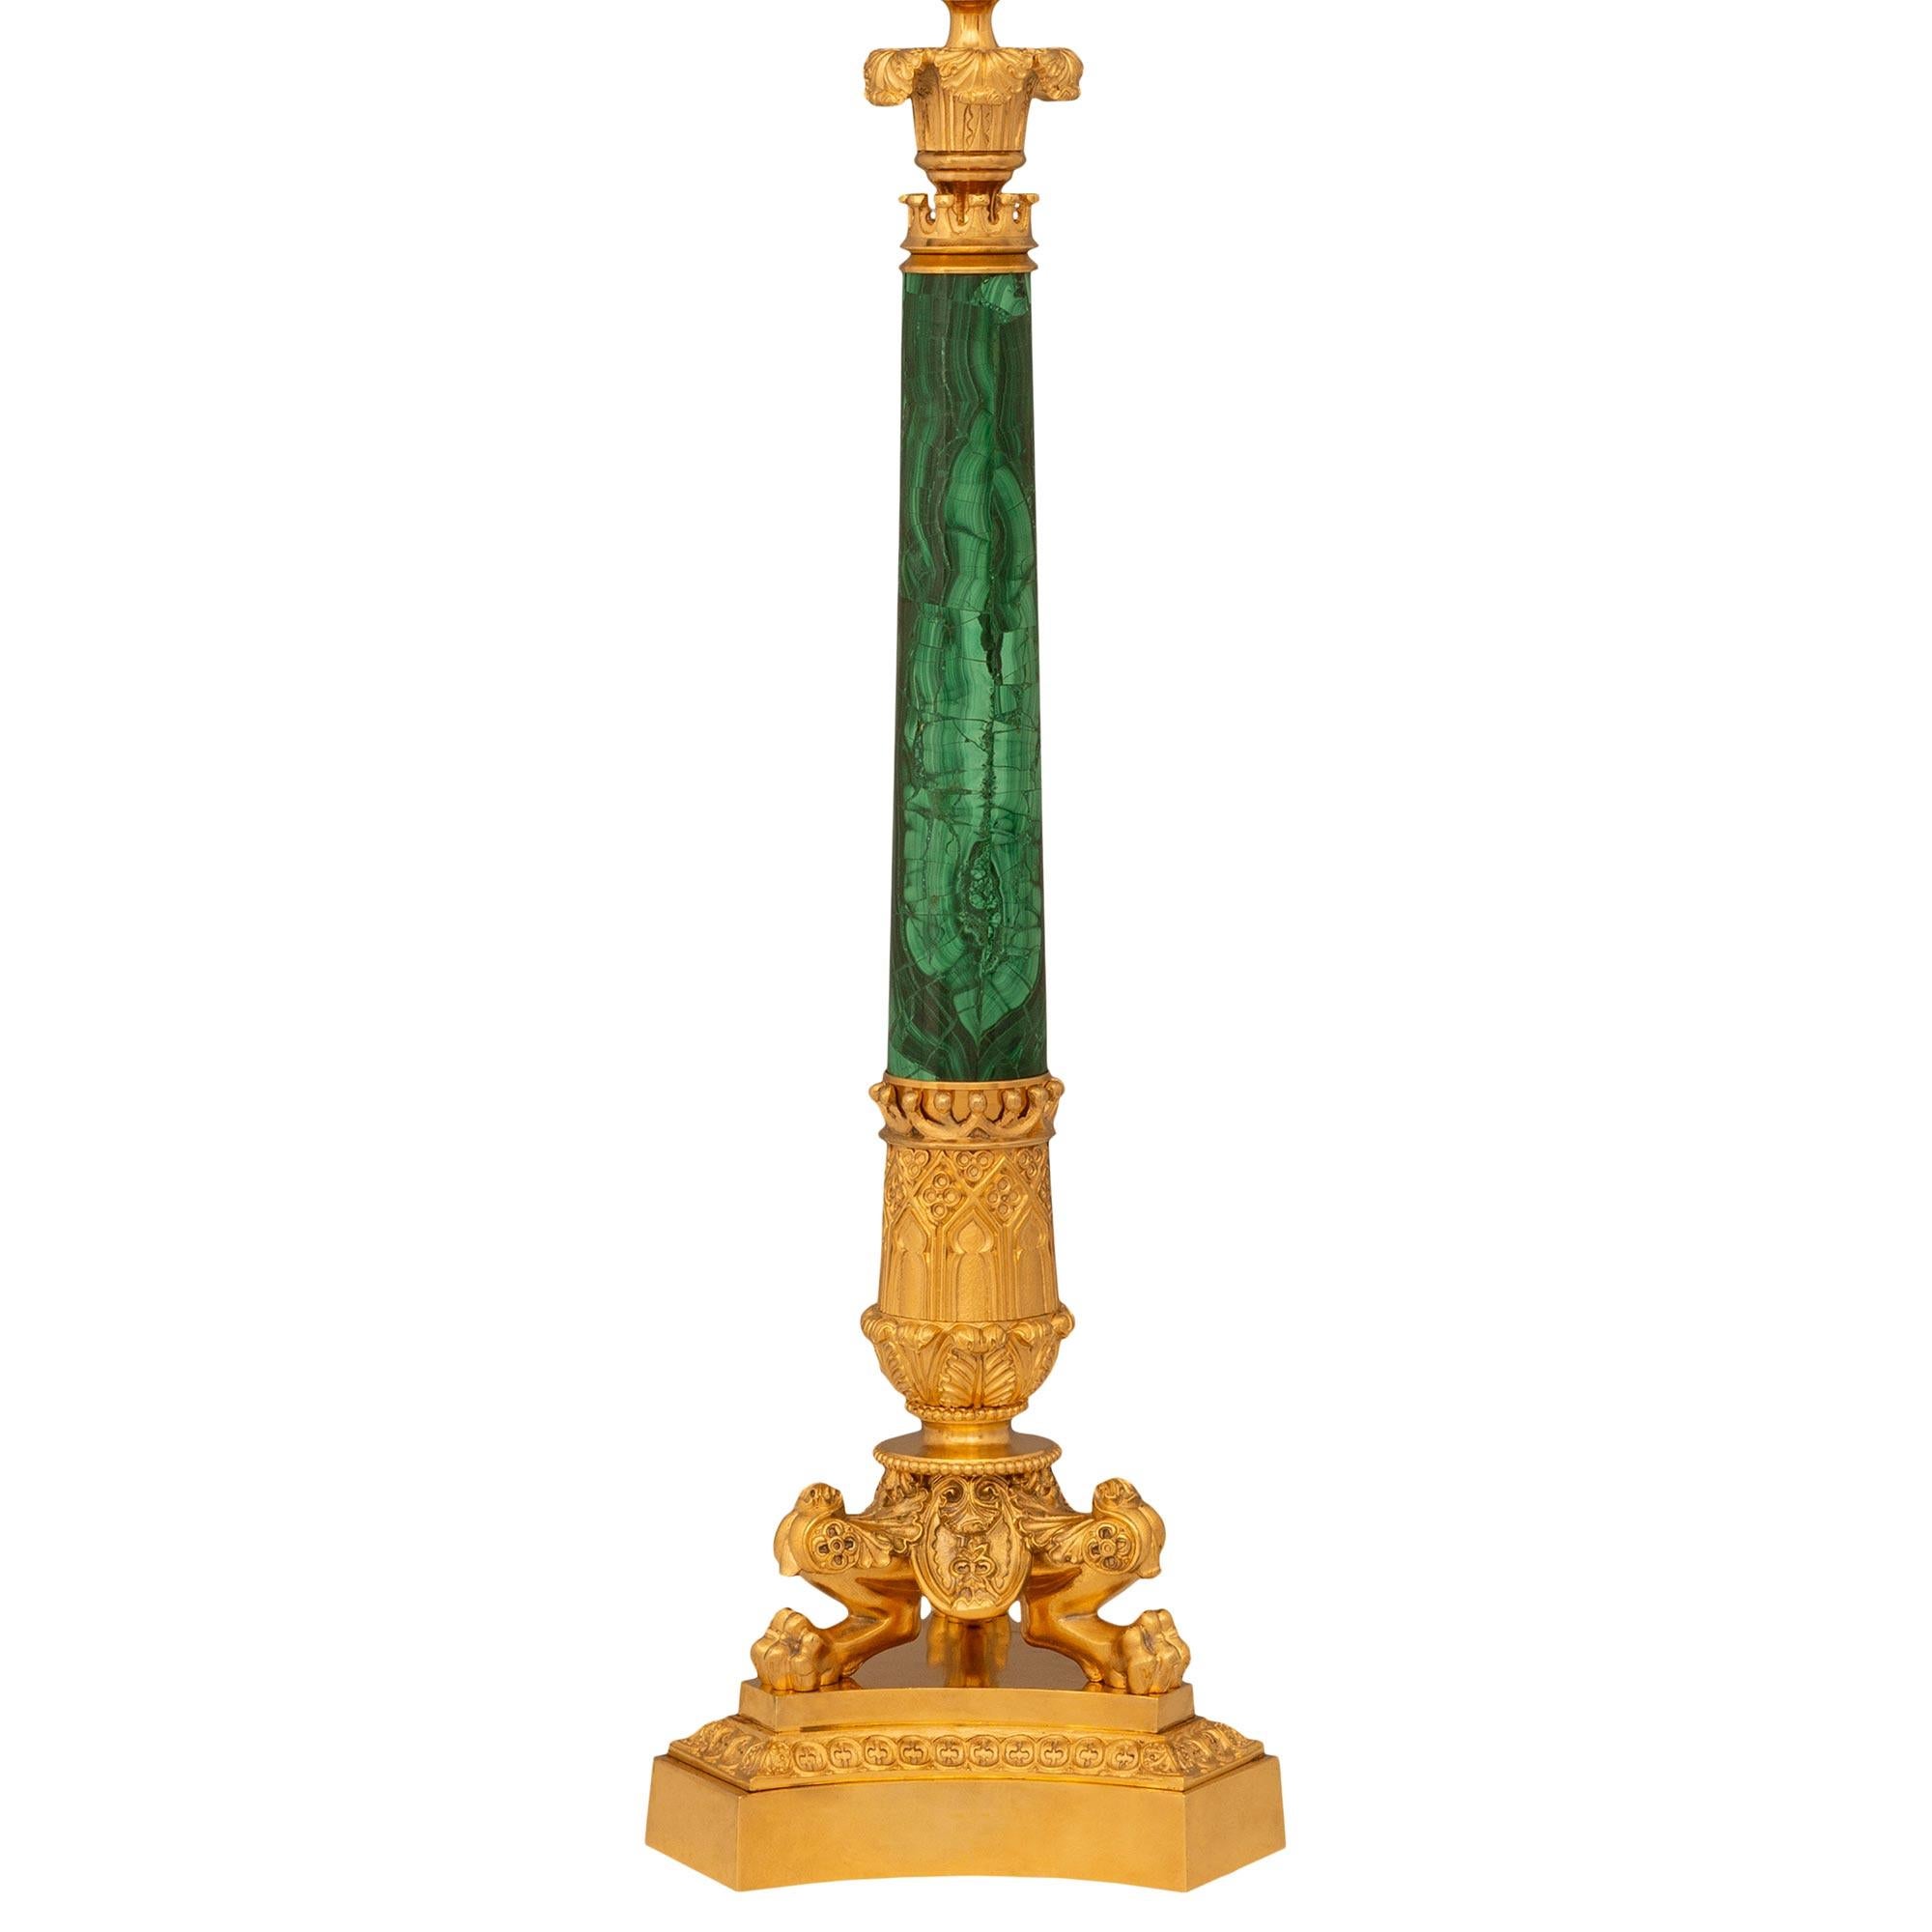 A unique and most decorated pair of French 19th century Charles X st. Ormolu and Malachite lamps. Each lamp is raised by a three sided concave Ormolu base with a mottled band of dentil designs. Above the pedestal, each lamp is supported by three paw